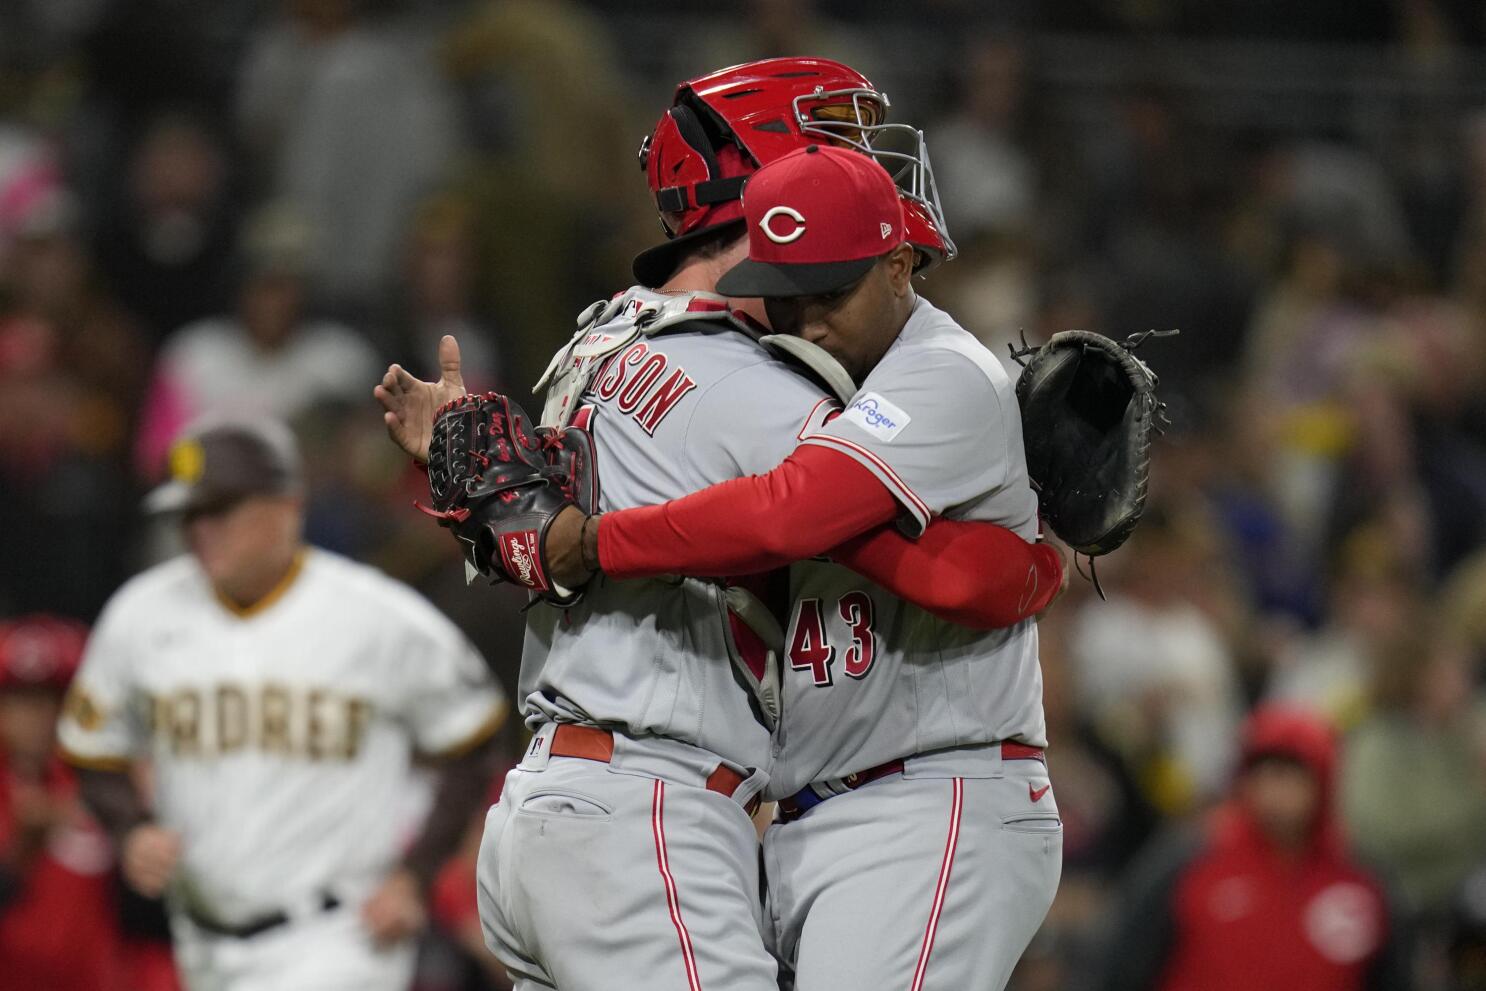 Xander Bogaerts homers for second straight day to help the Padres win again  at packed Petco Park - The Boston Globe